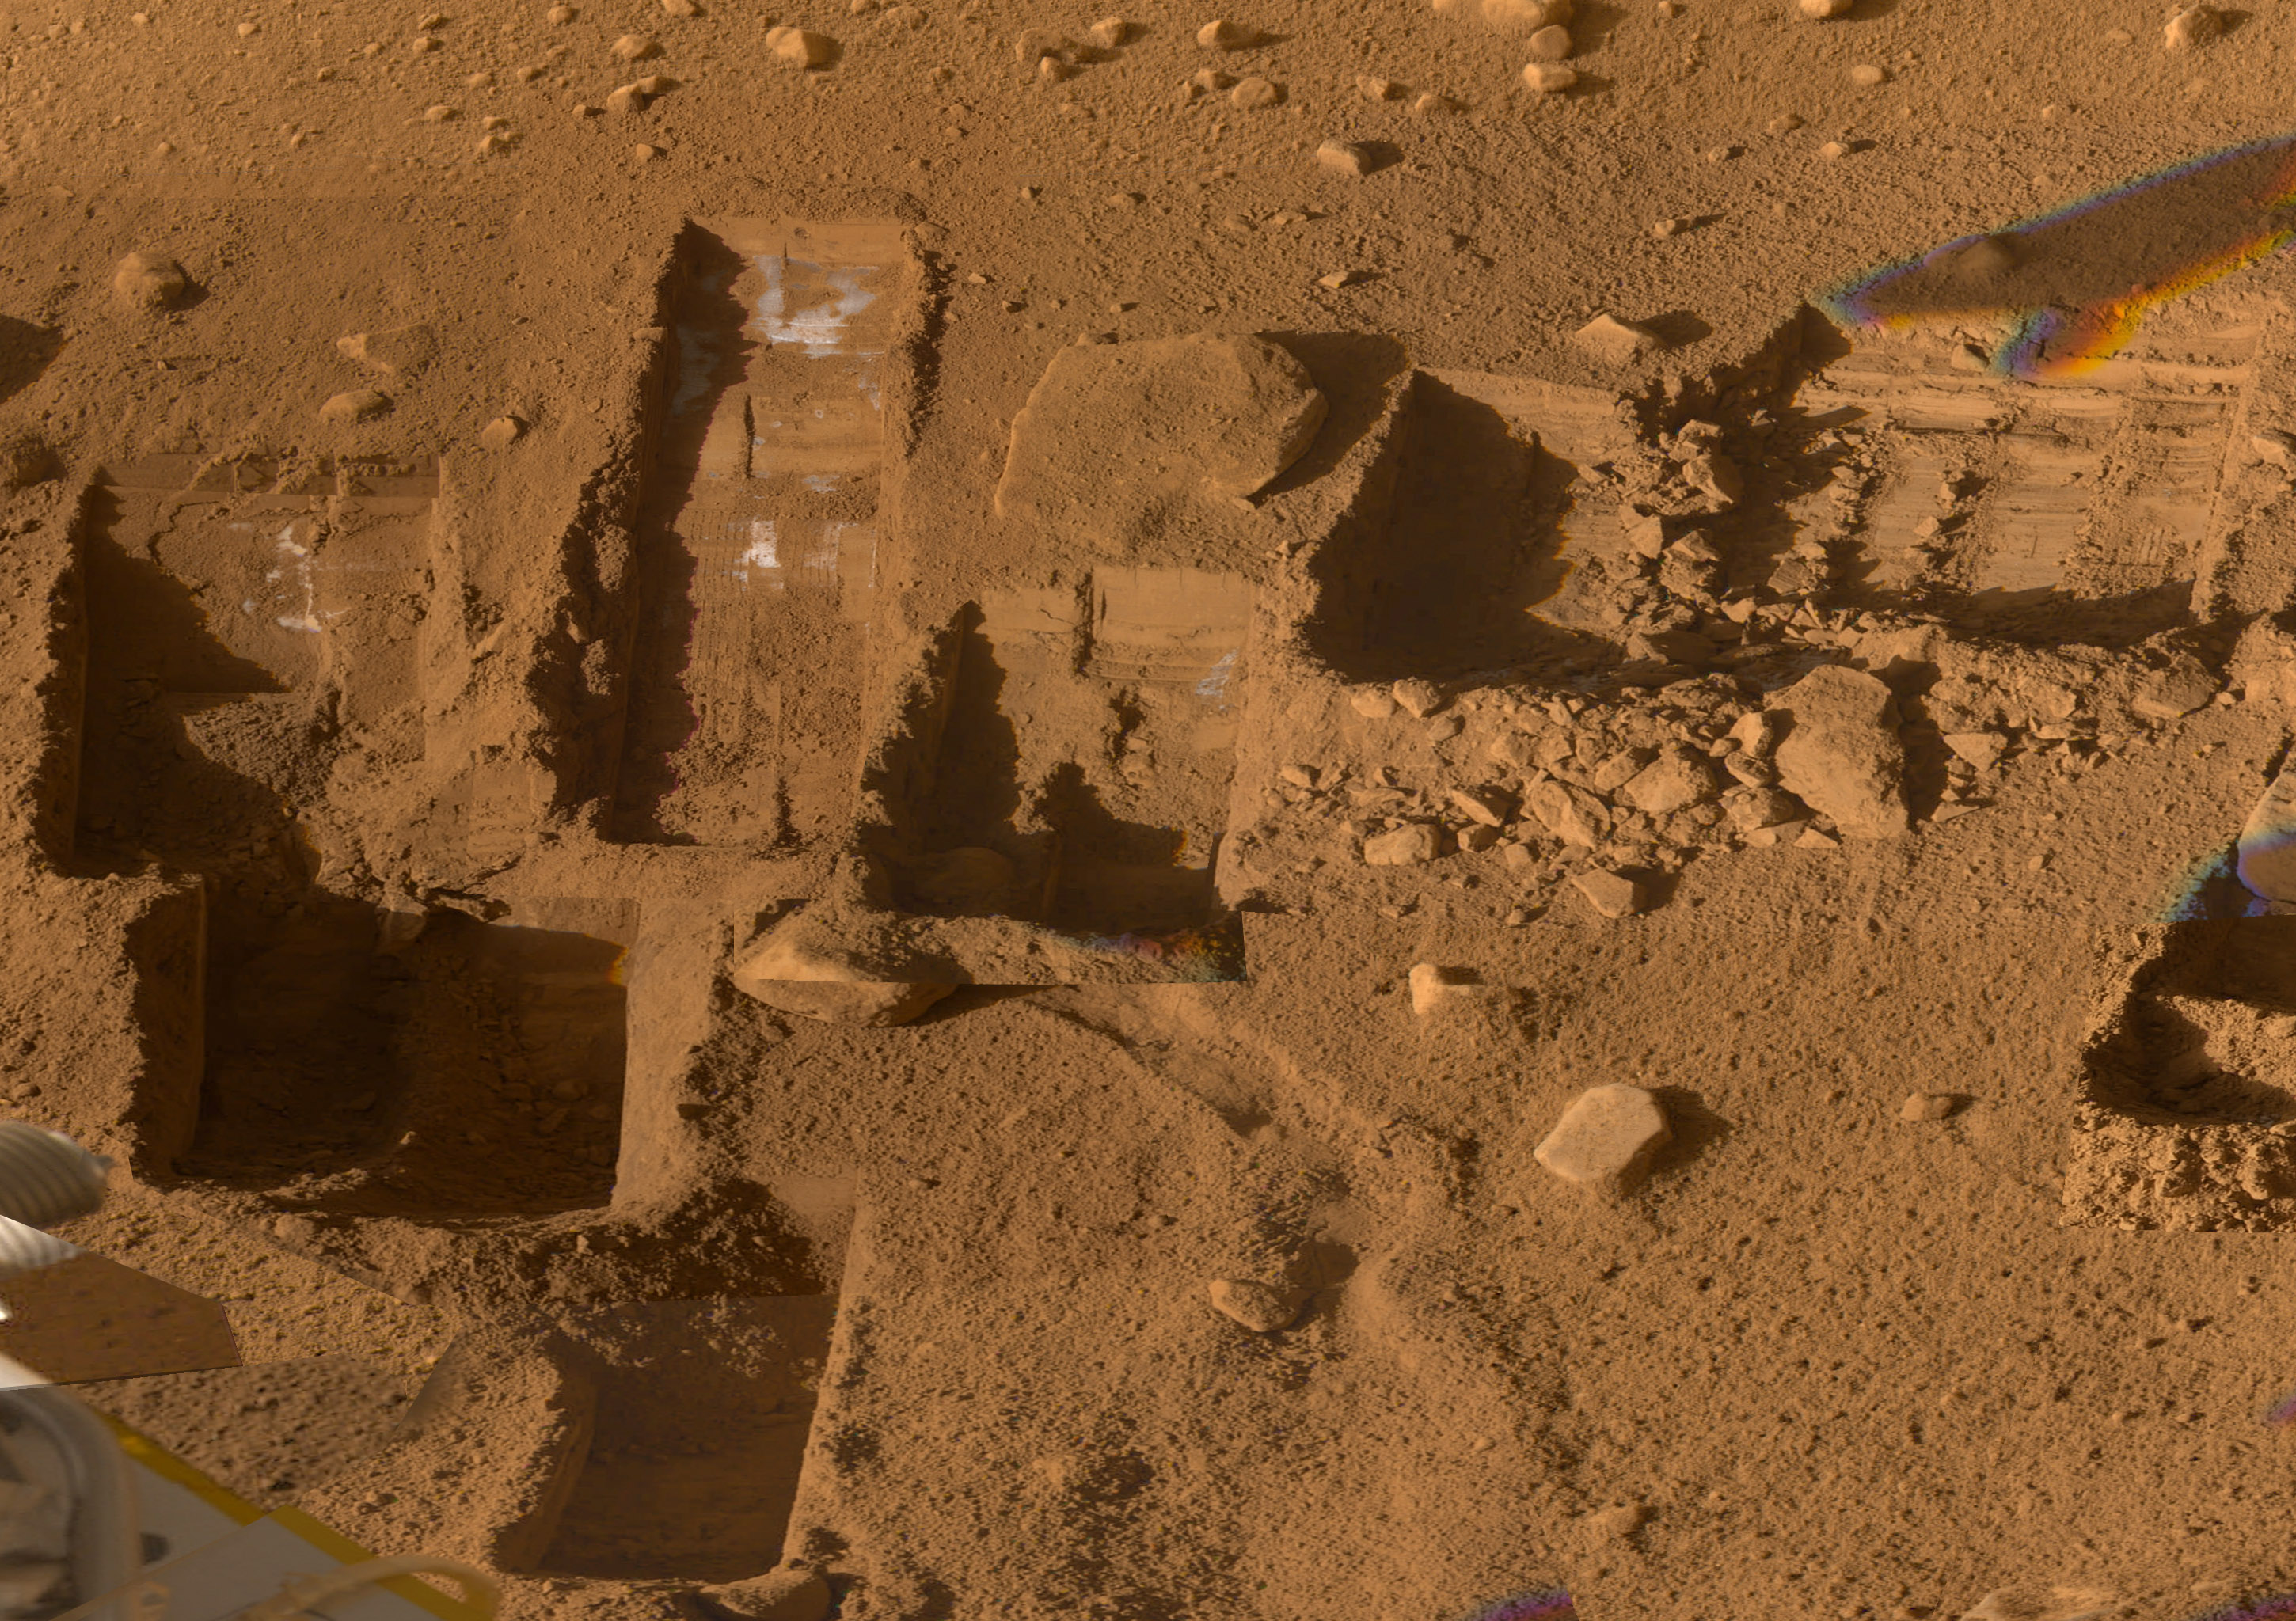 Loose Martian soil is marked with square scoops where the lander collected samples.